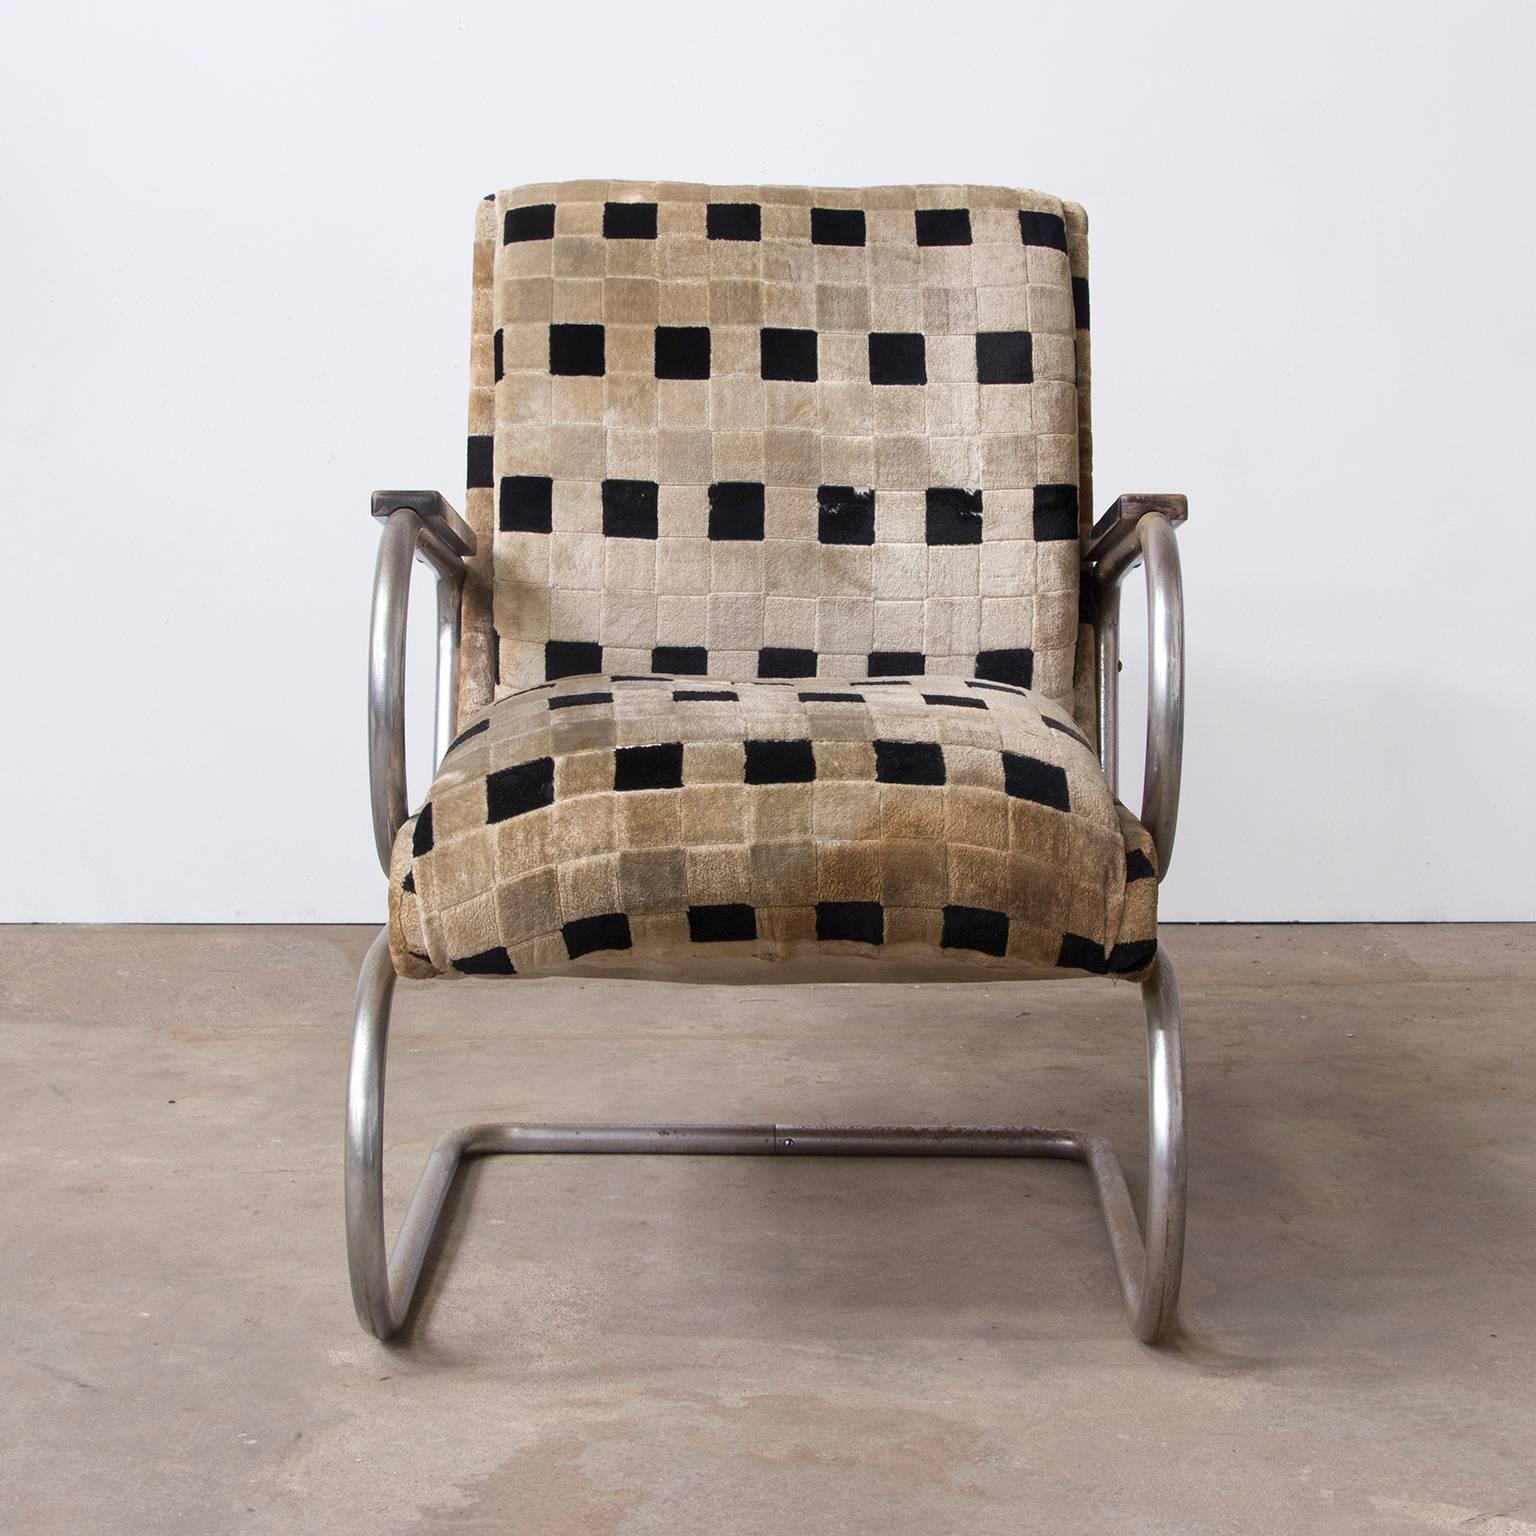 Mid-20th Century Original French Art Deco Lounge Chair and Original Soft Comfy Fabric, circa 1935 For Sale